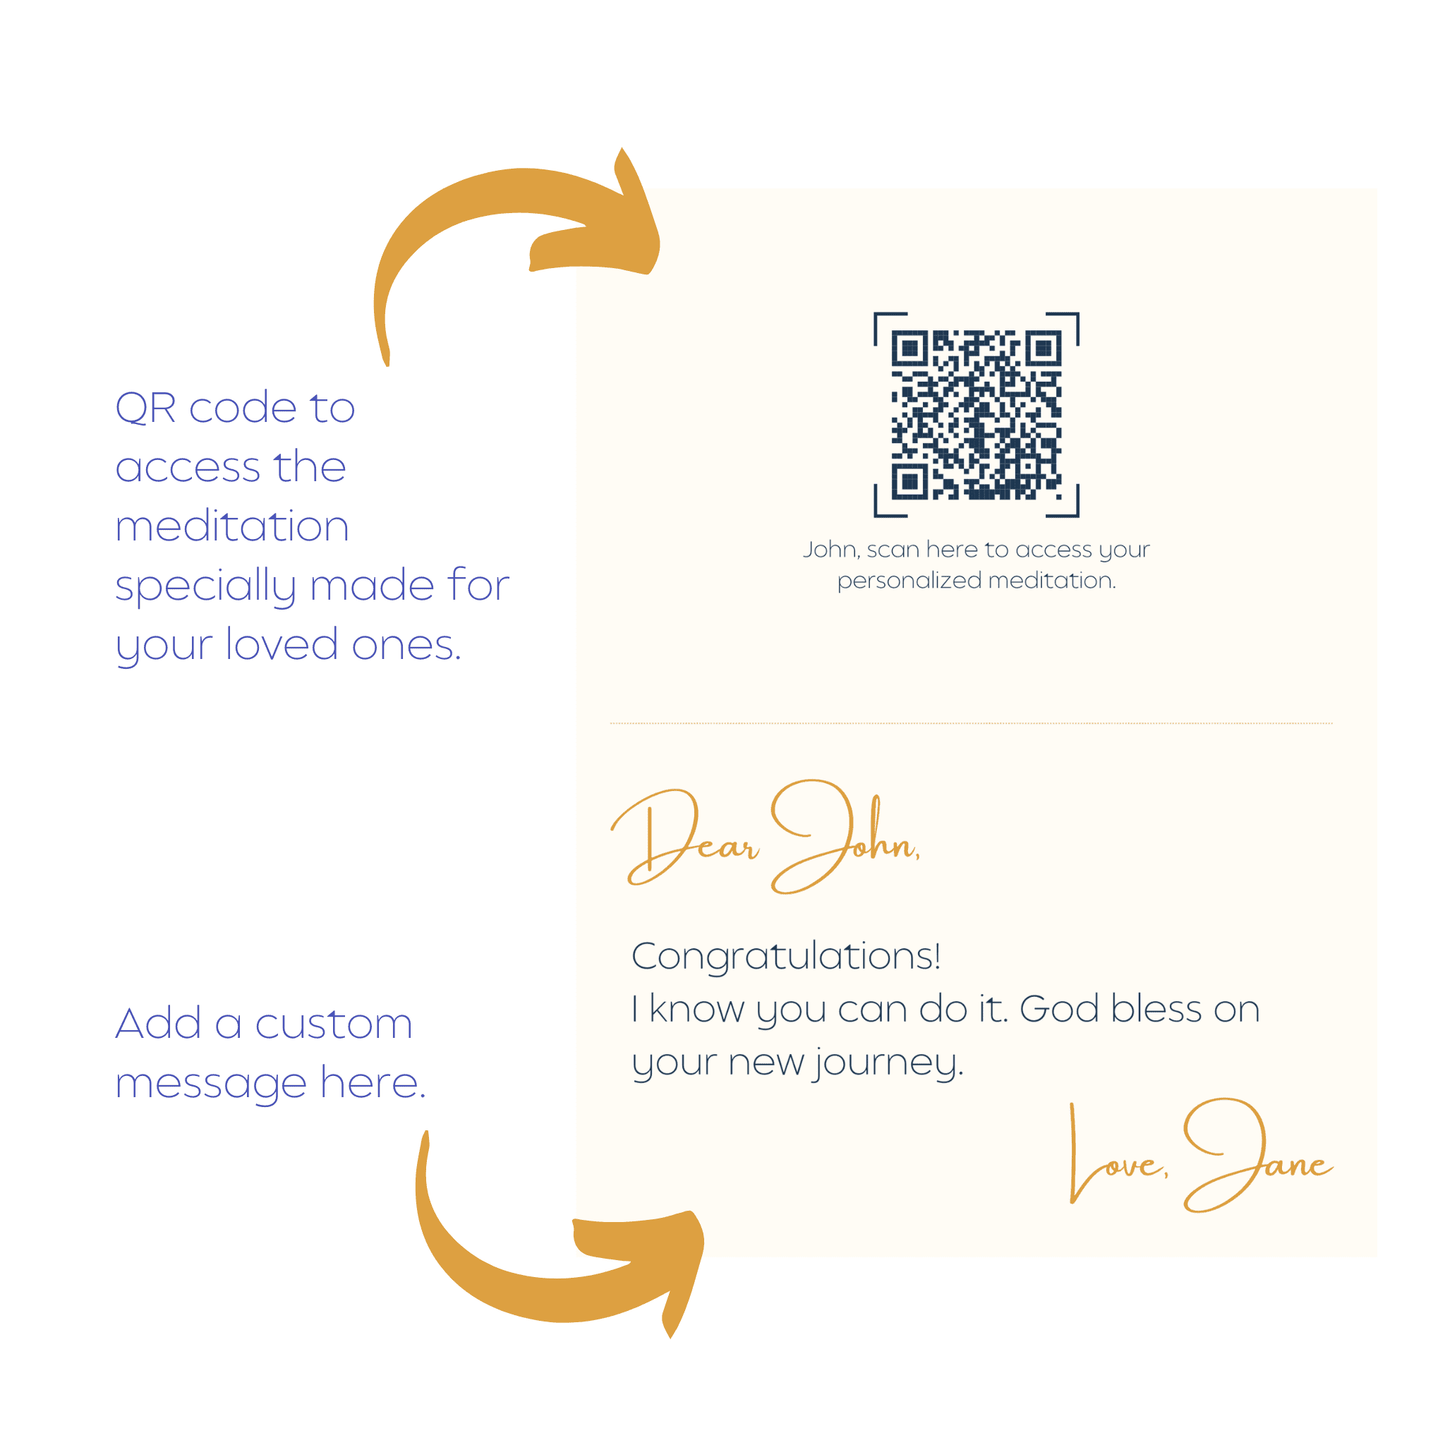 personalized meditation card with qr code